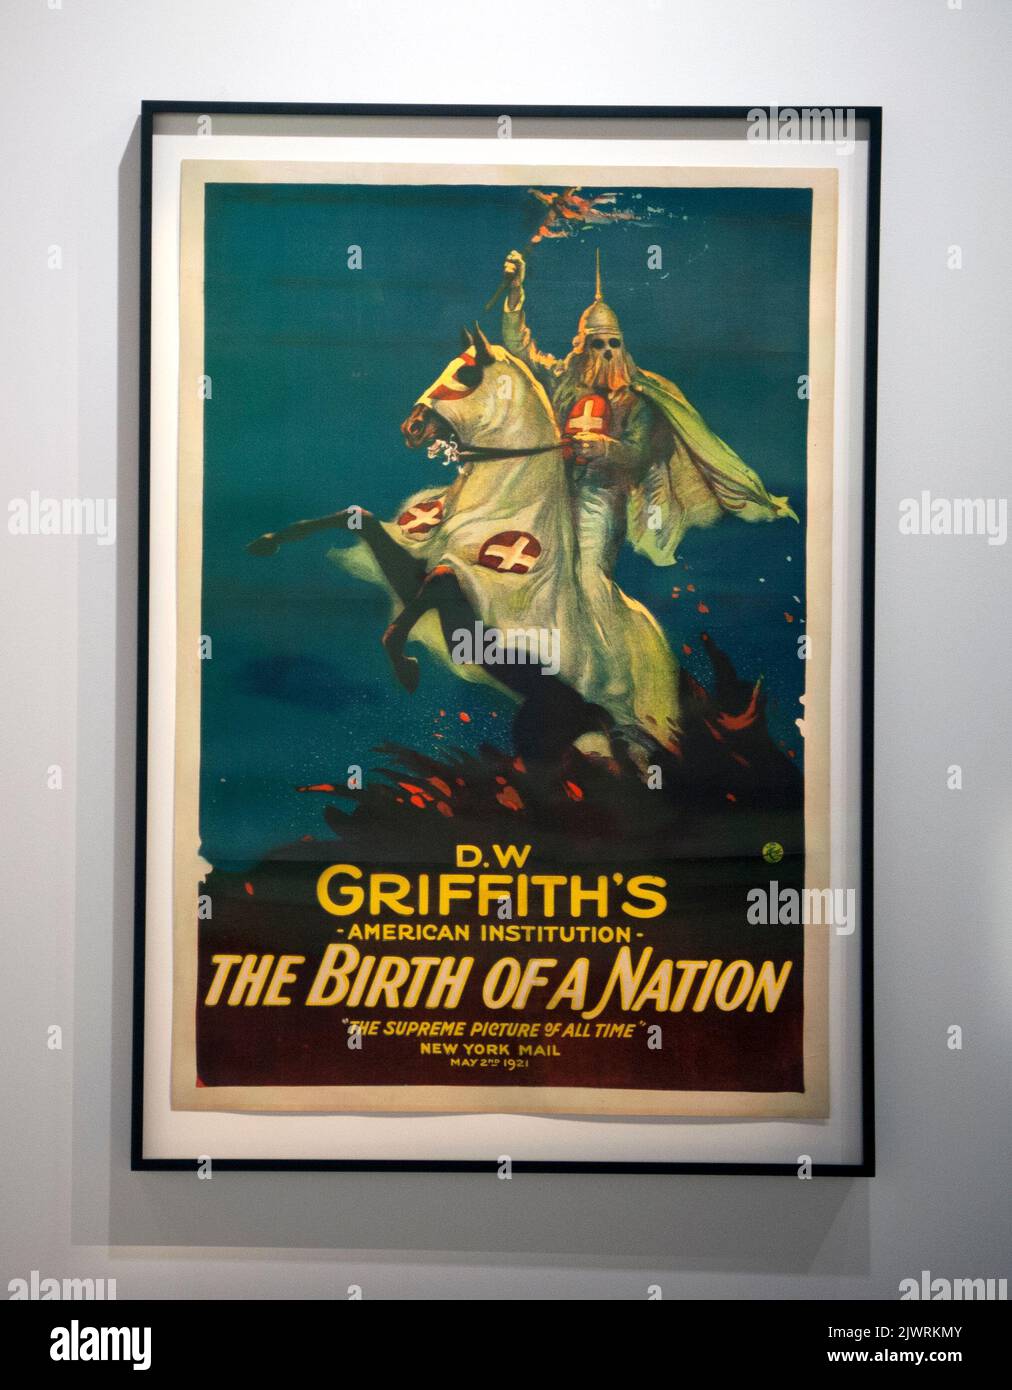 Movie poster for the film 'The Birth of a Nation' by D.W. Griffith. Stock Photo